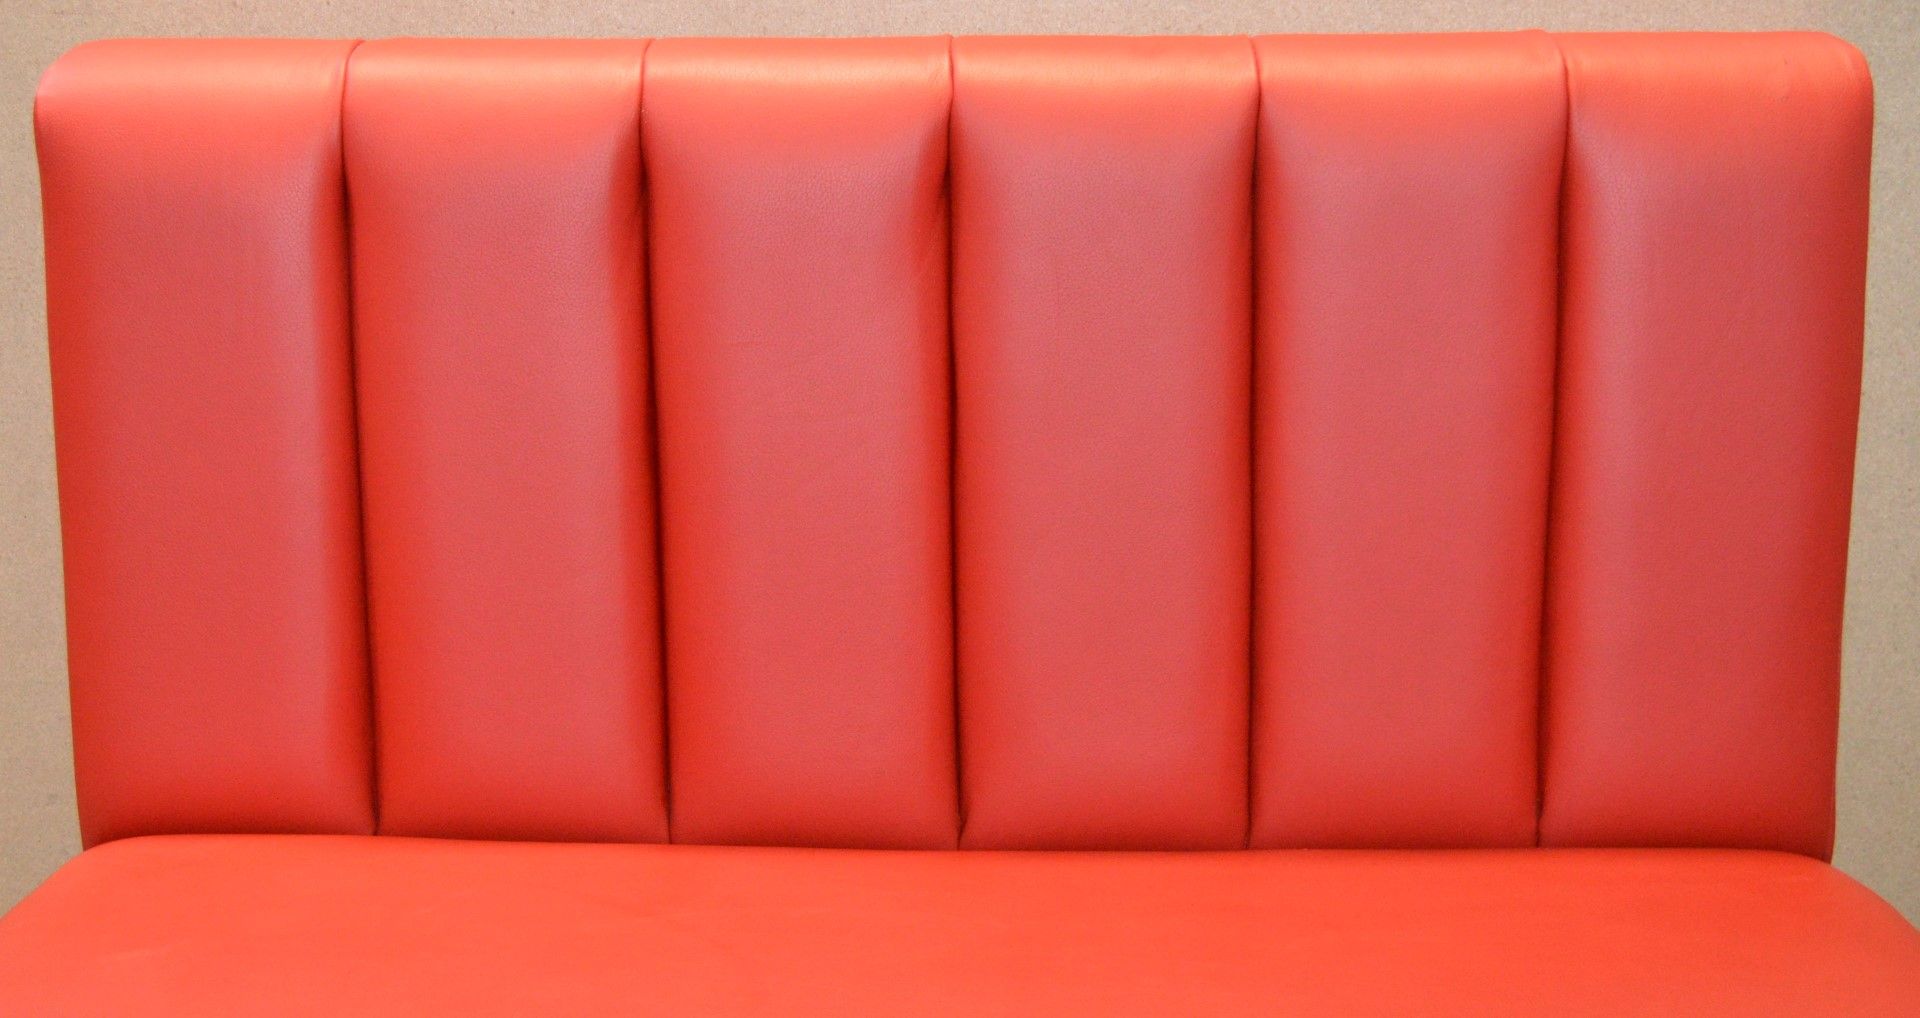 1 x High Seat Single Seating Bench Upholstered in Red Leather - Sits upto Two People - High - Image 9 of 16